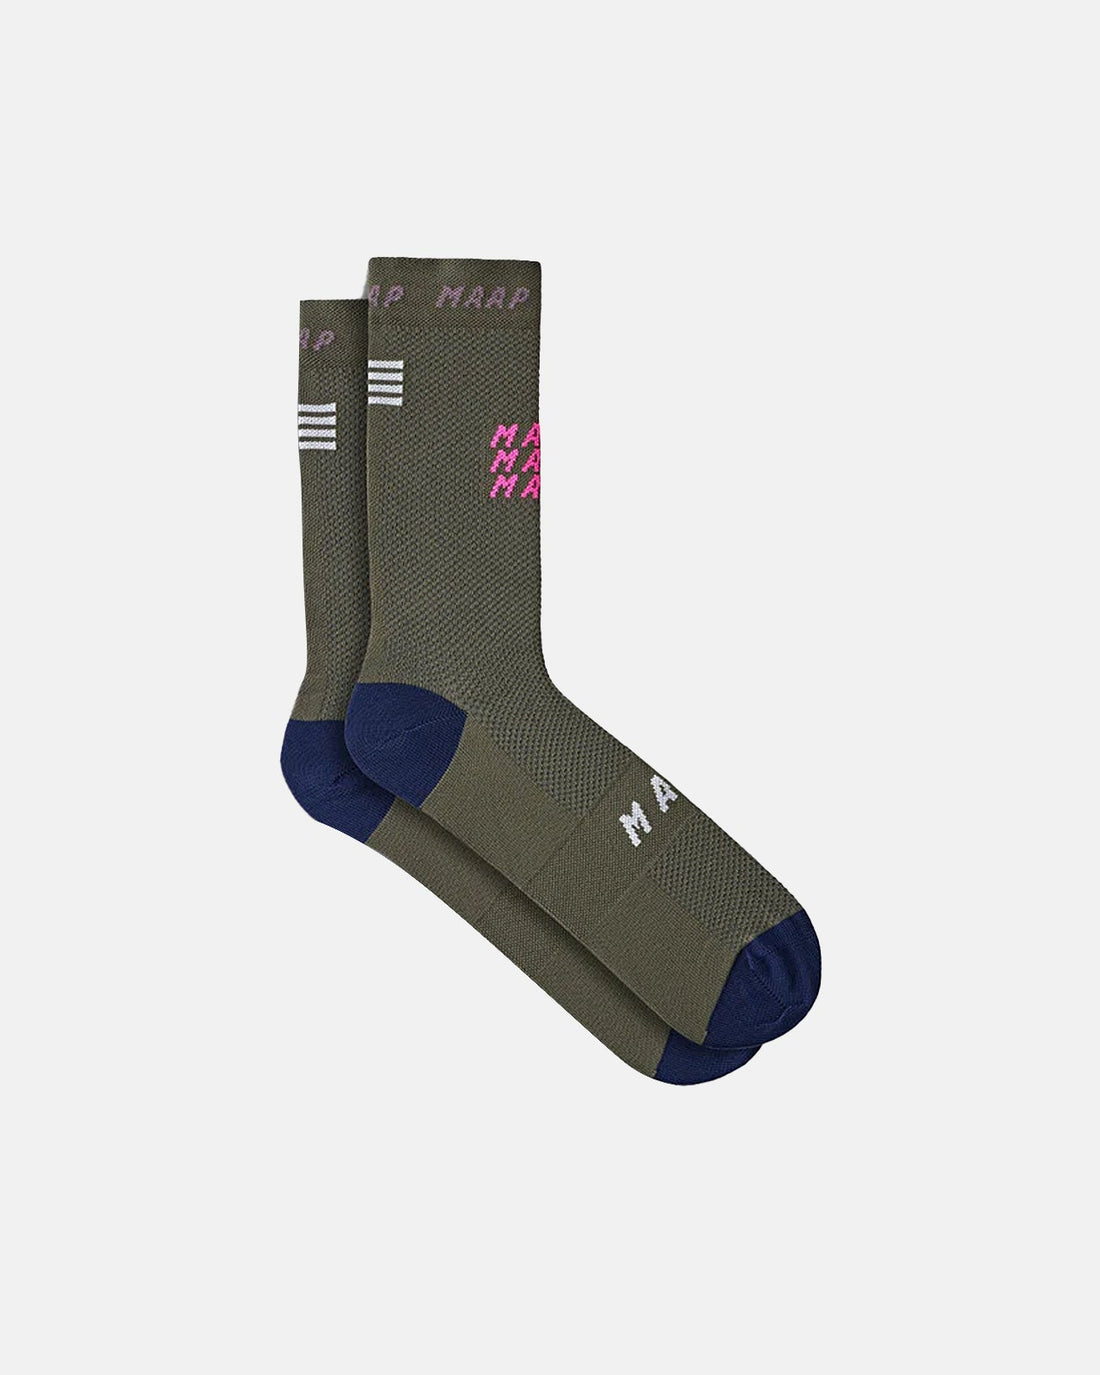 MAAP Eclipse Sock - Olive